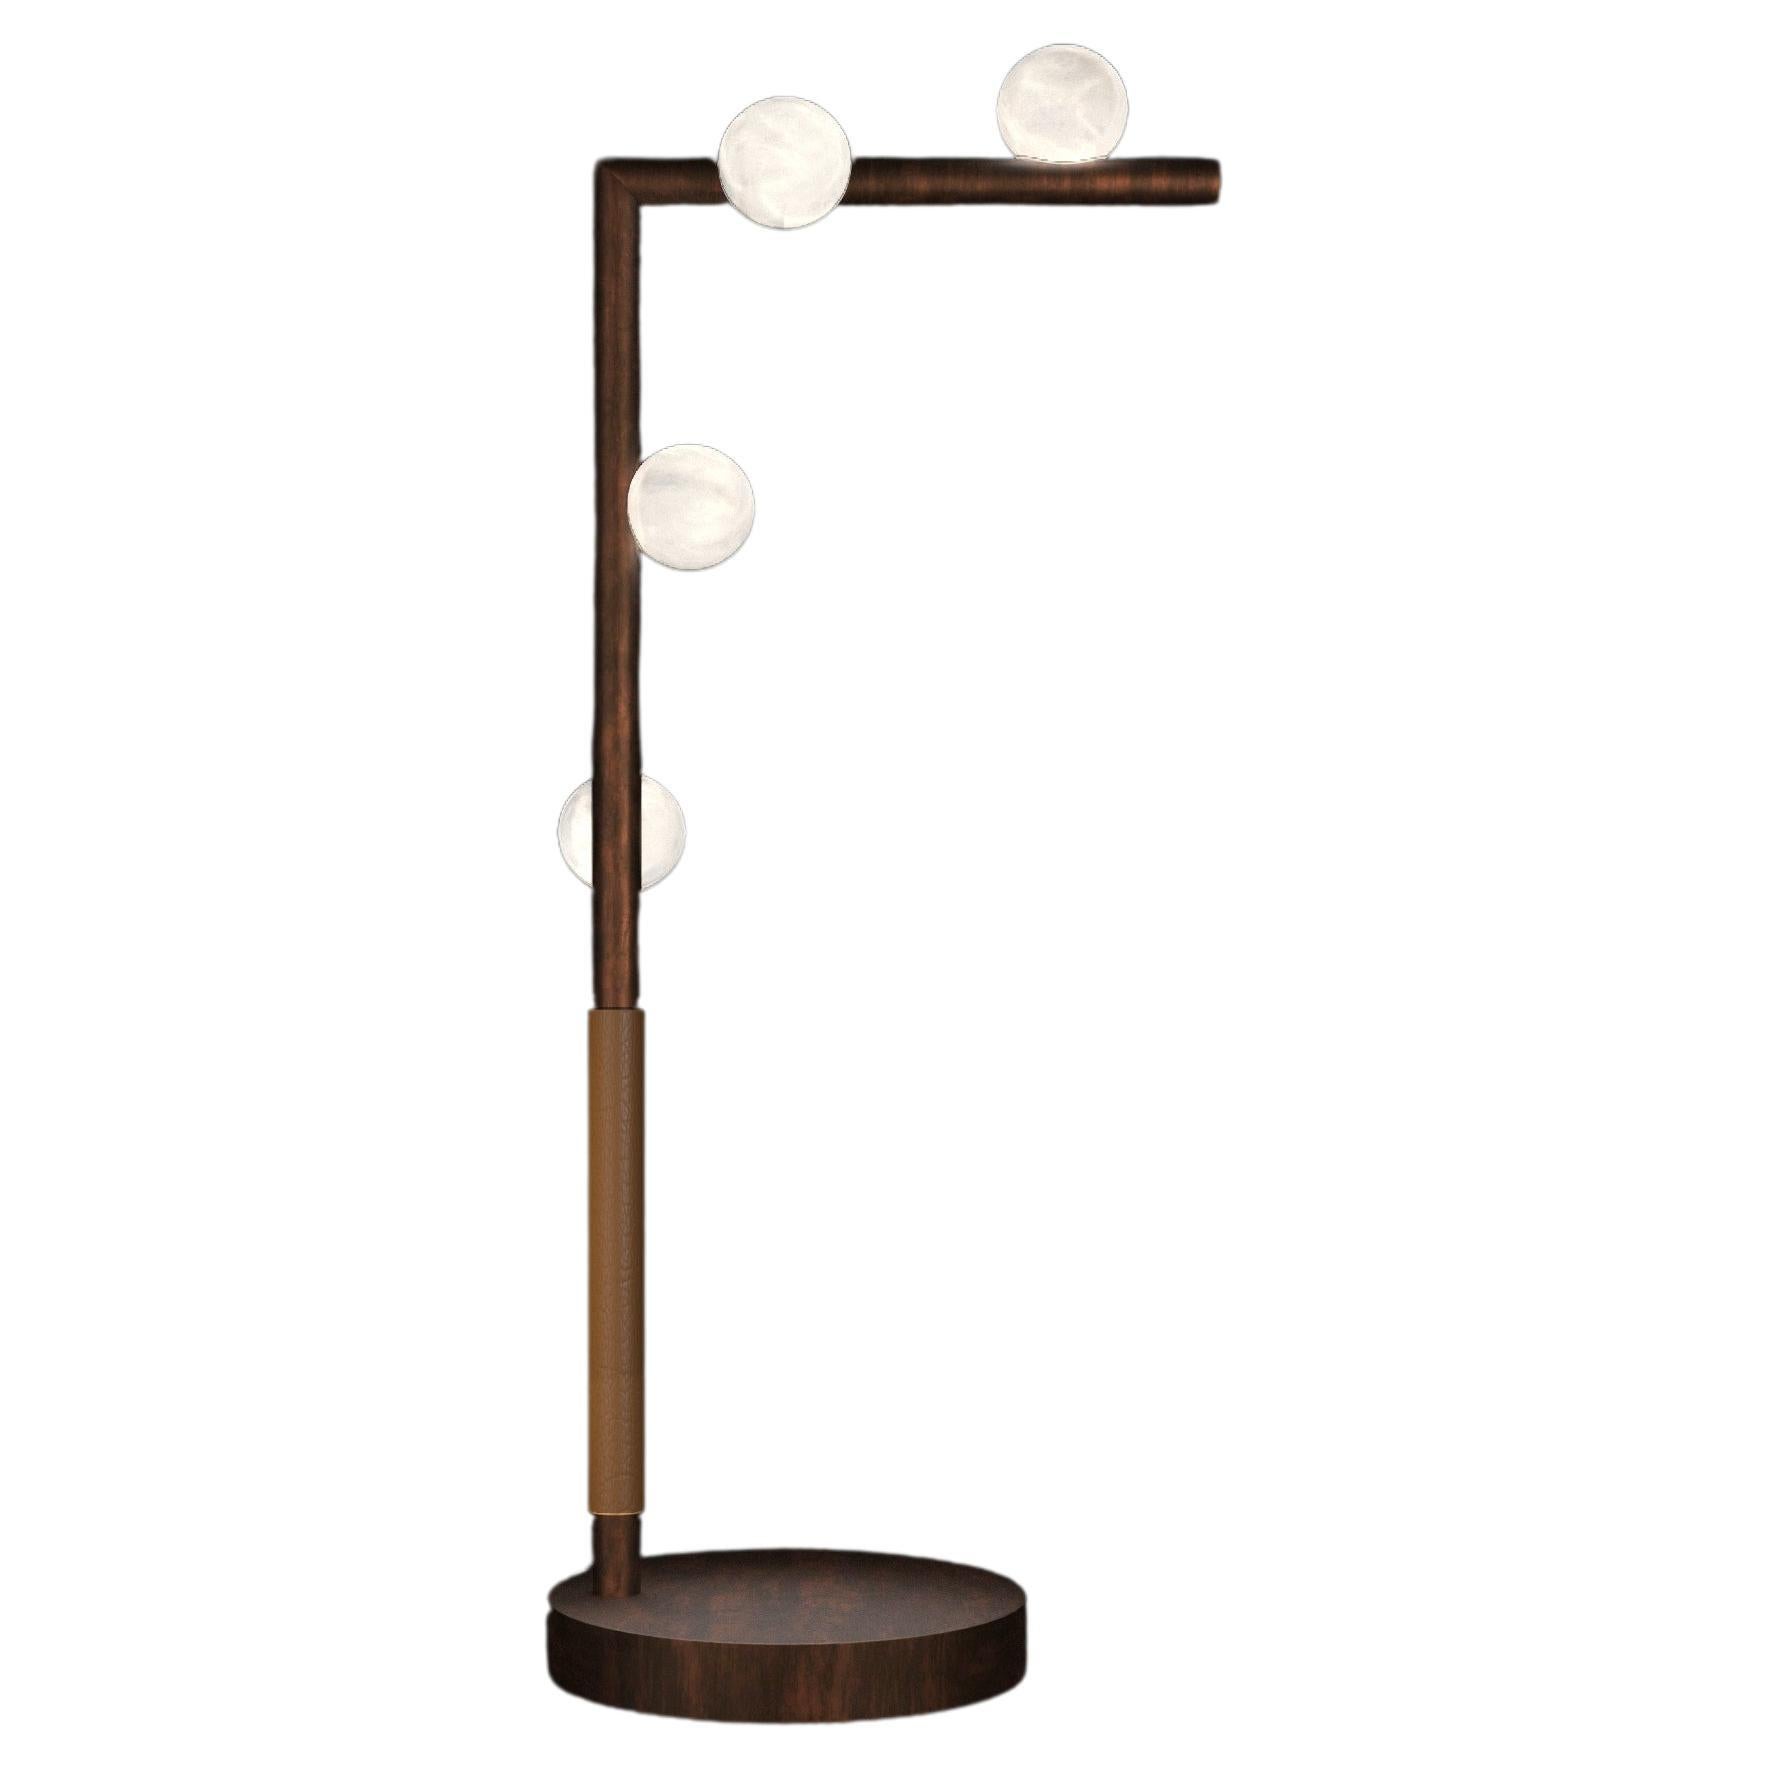 Demetra Ruggine Of Florence Metal Table Lamp by Alabastro Italiano